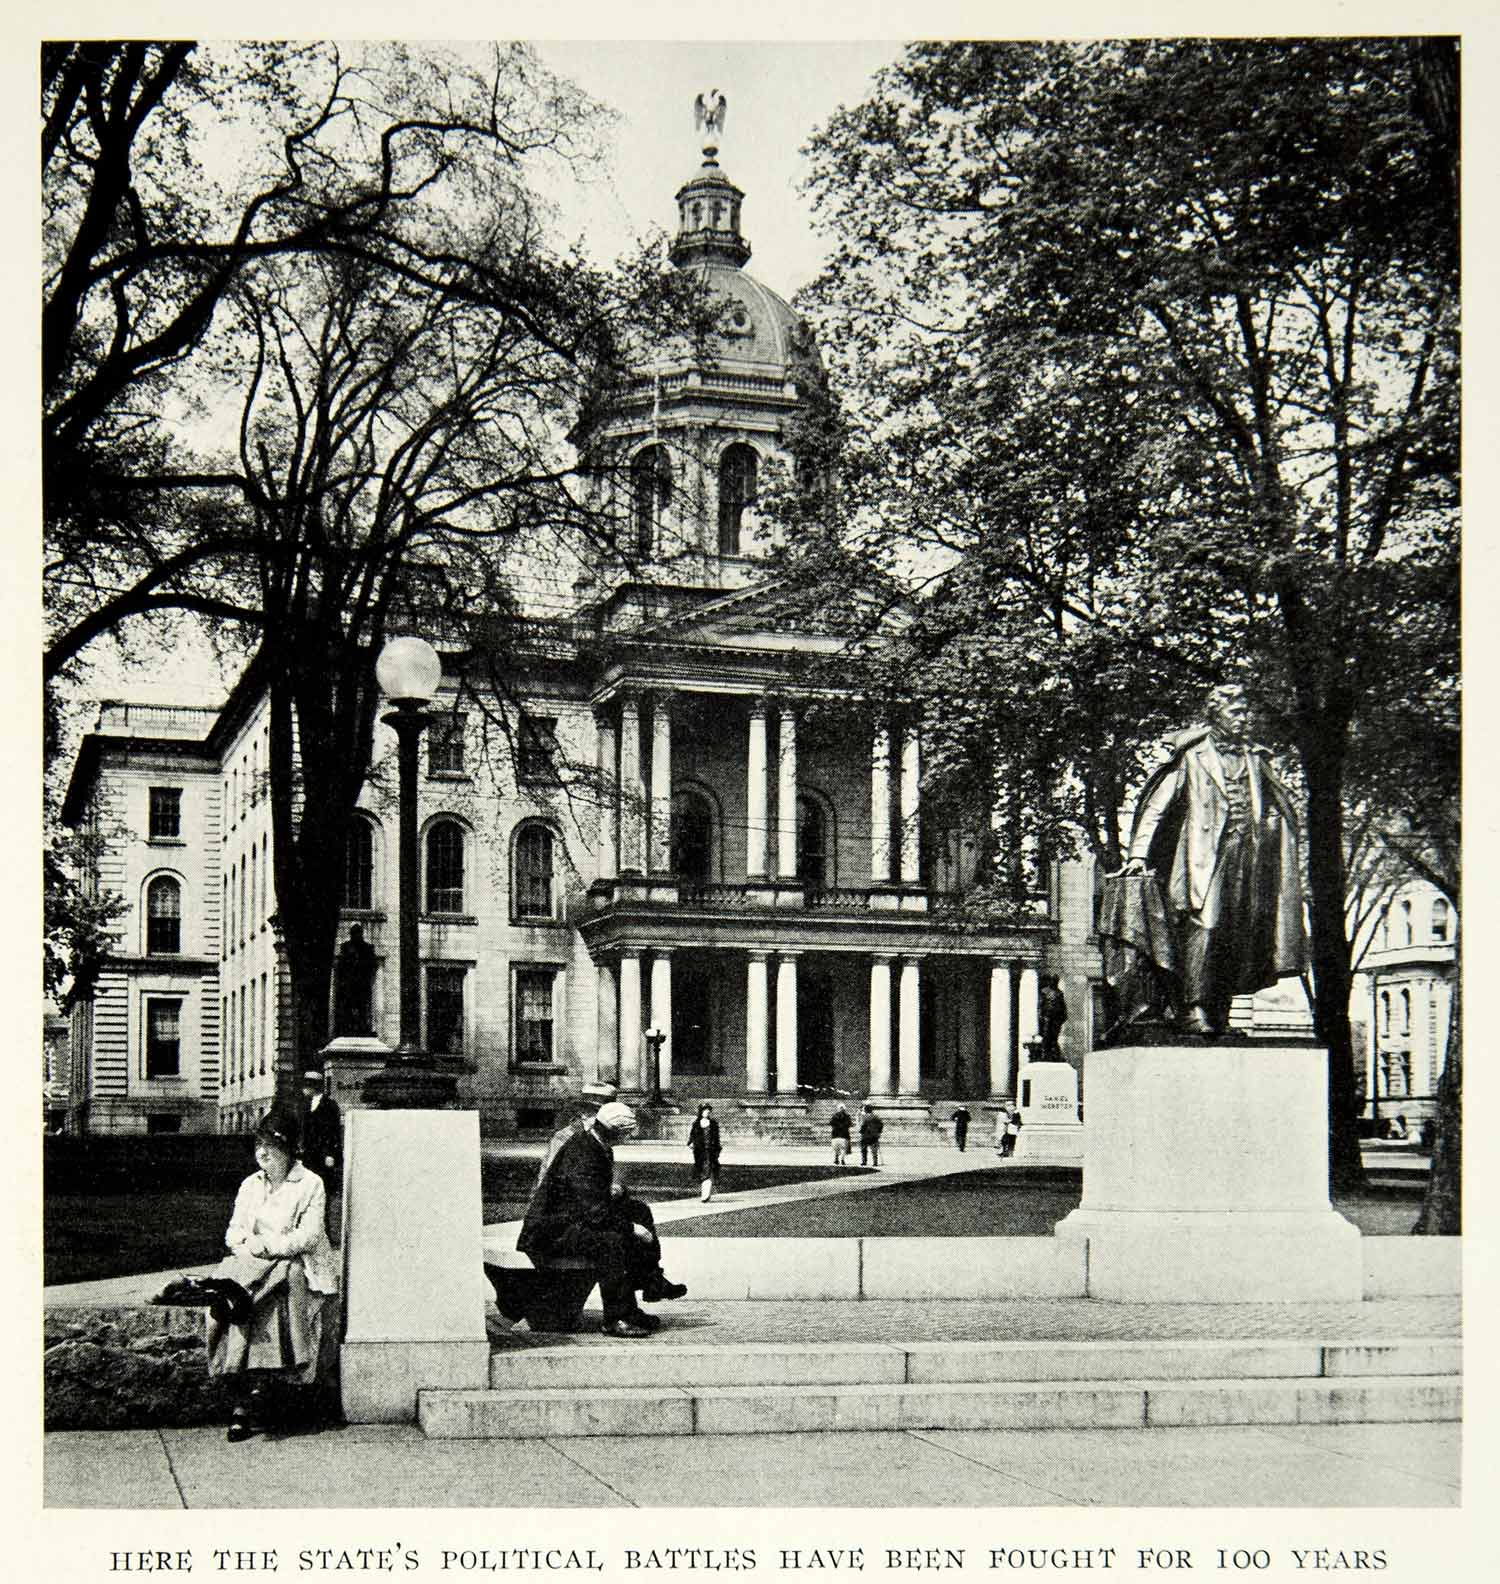 1931 Print Statehouse Concord New Hampshire Government Building Statue NGM8